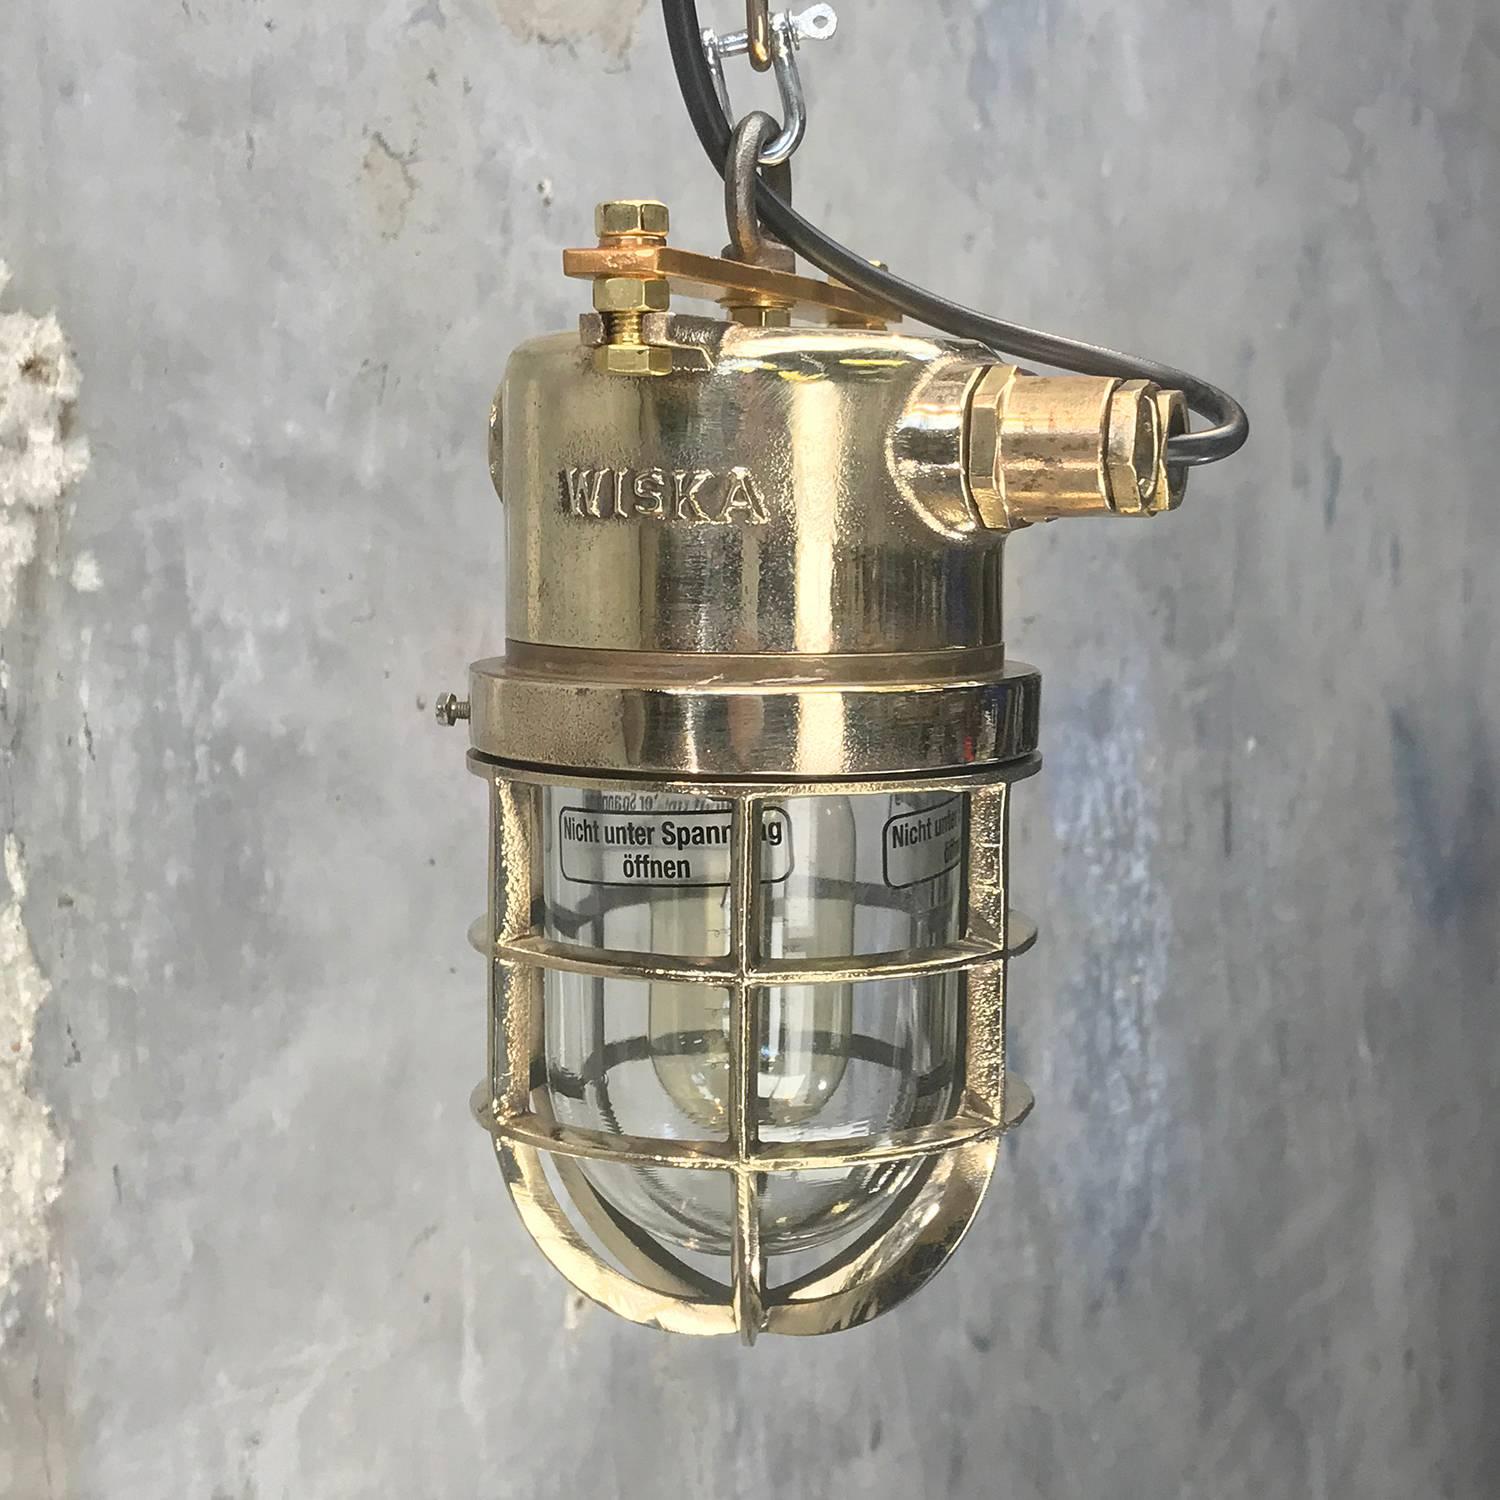 Late Century German Cast Brass and Glass Shade Explosion Proof Pendant Light For Sale 7